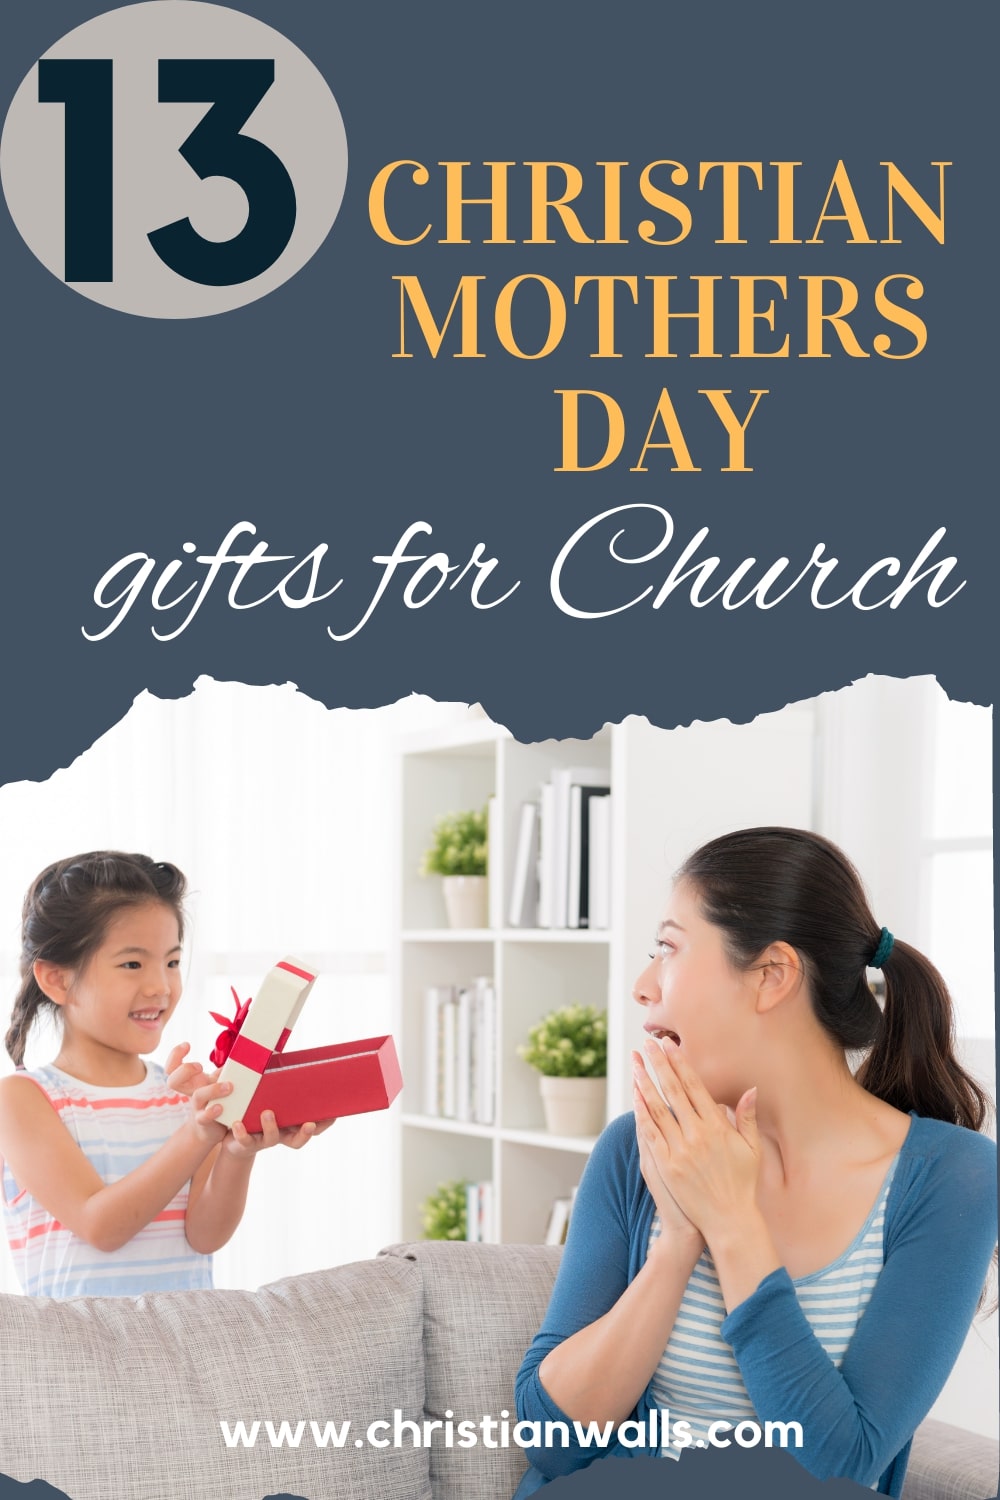 https://cdn.shopify.com/s/files/1/2314/2157/files/13_Top_Christian_Mother_s_Day_Gifts_for_Church_Custom_Personalized_Bespoke_Ideas.jpg?v=1644993917